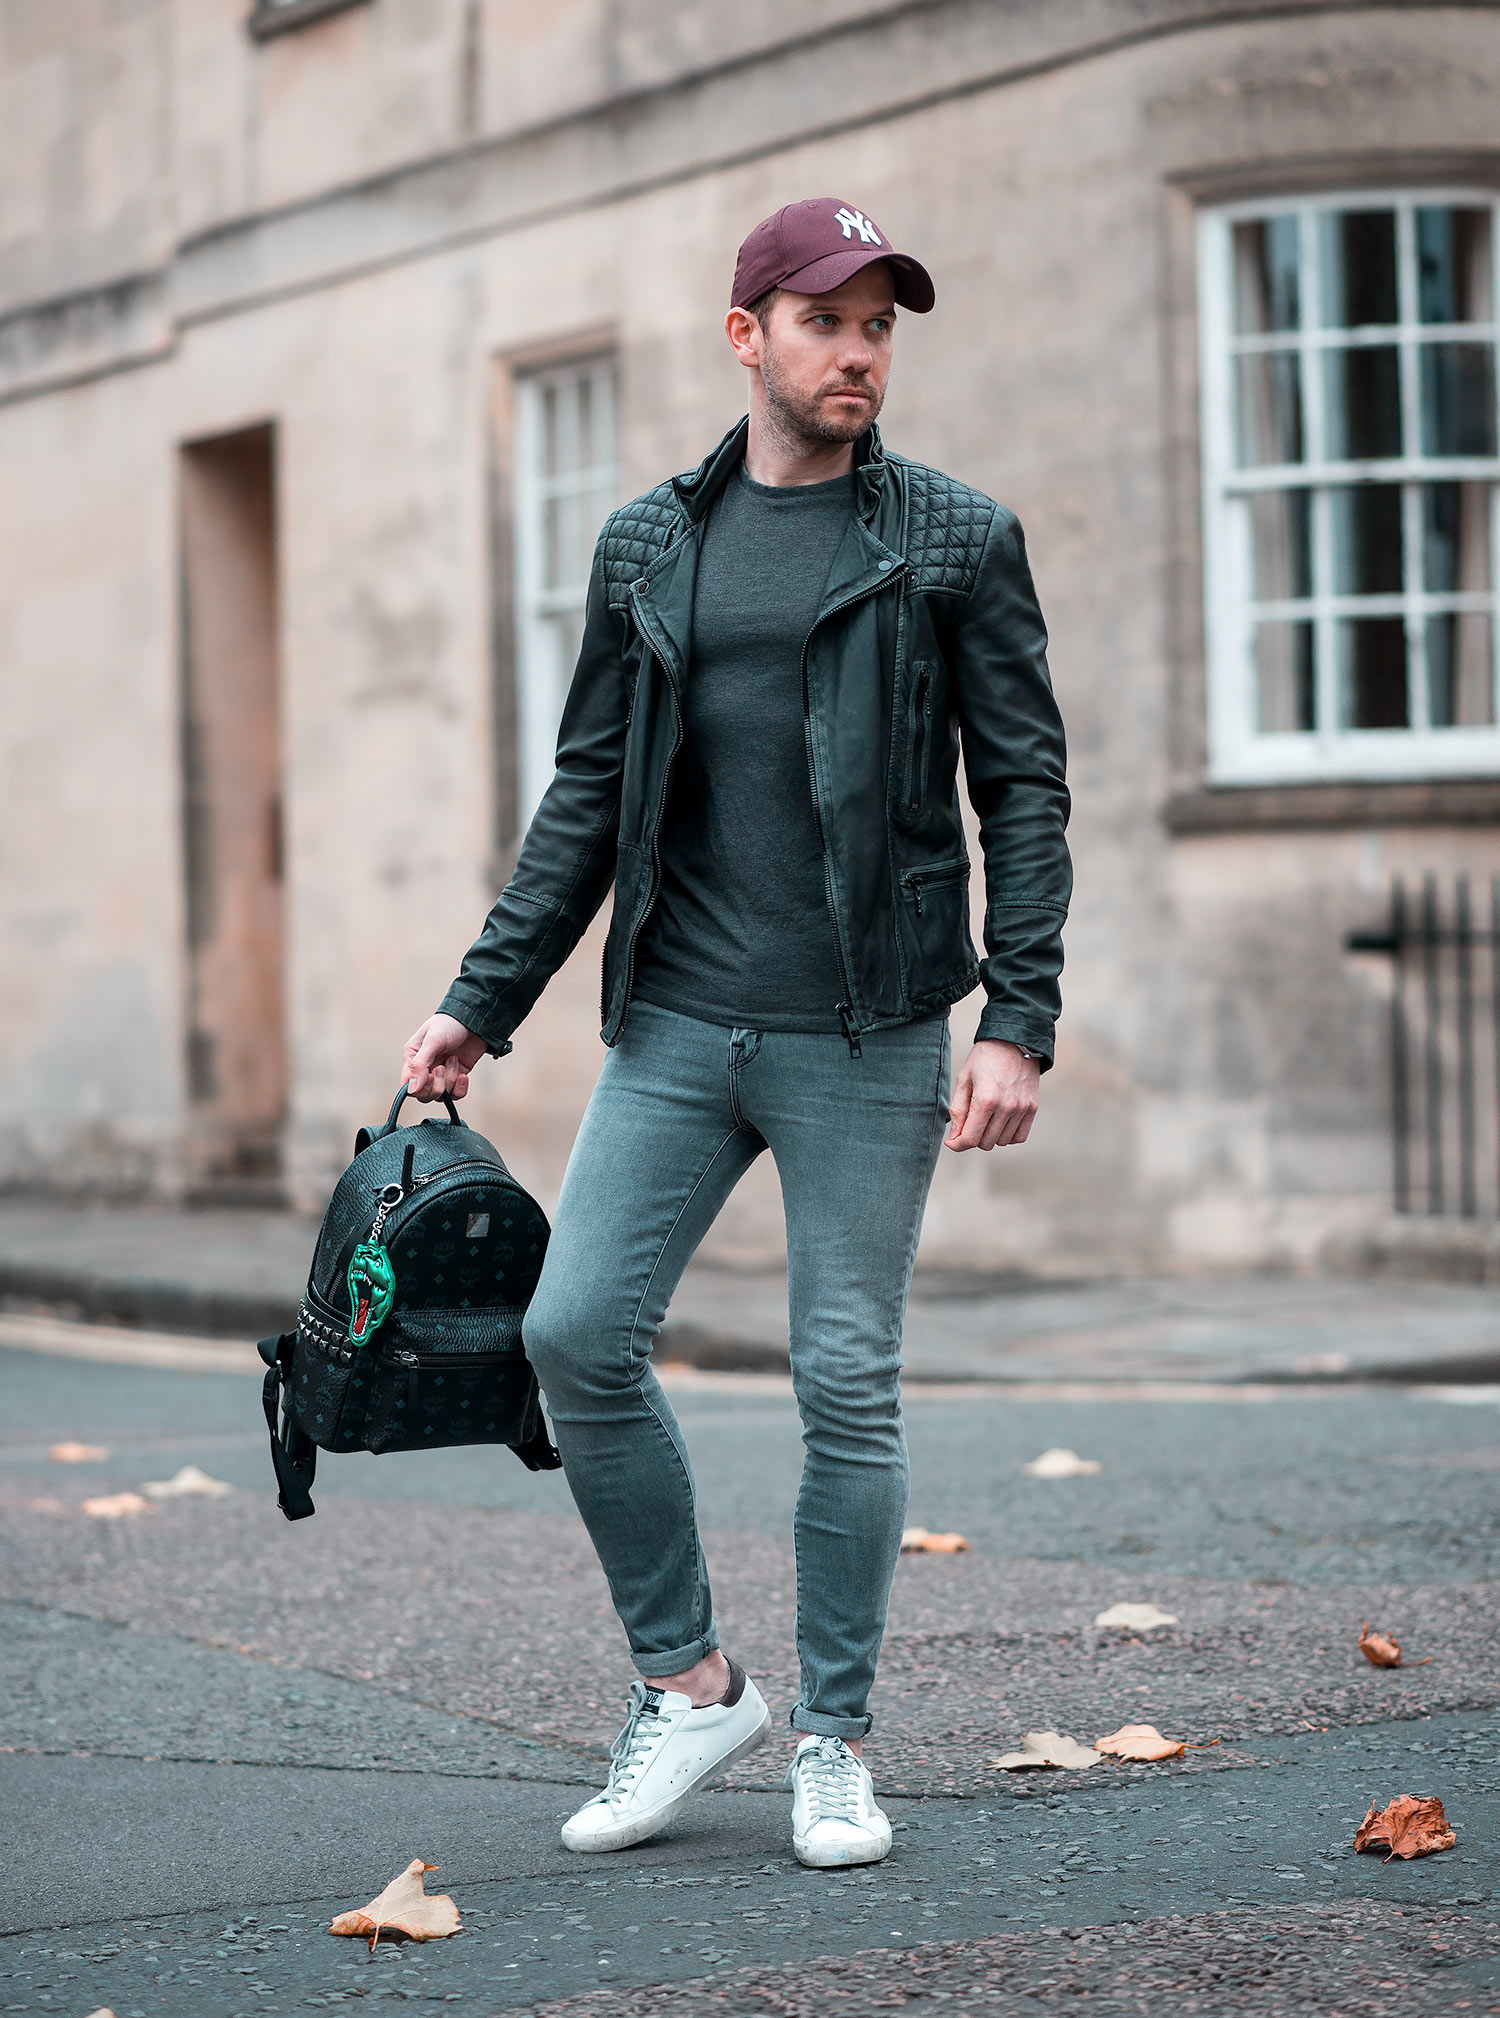 Allsaints Cargo Leather Jacket and MCM Backpack Outfit Combination